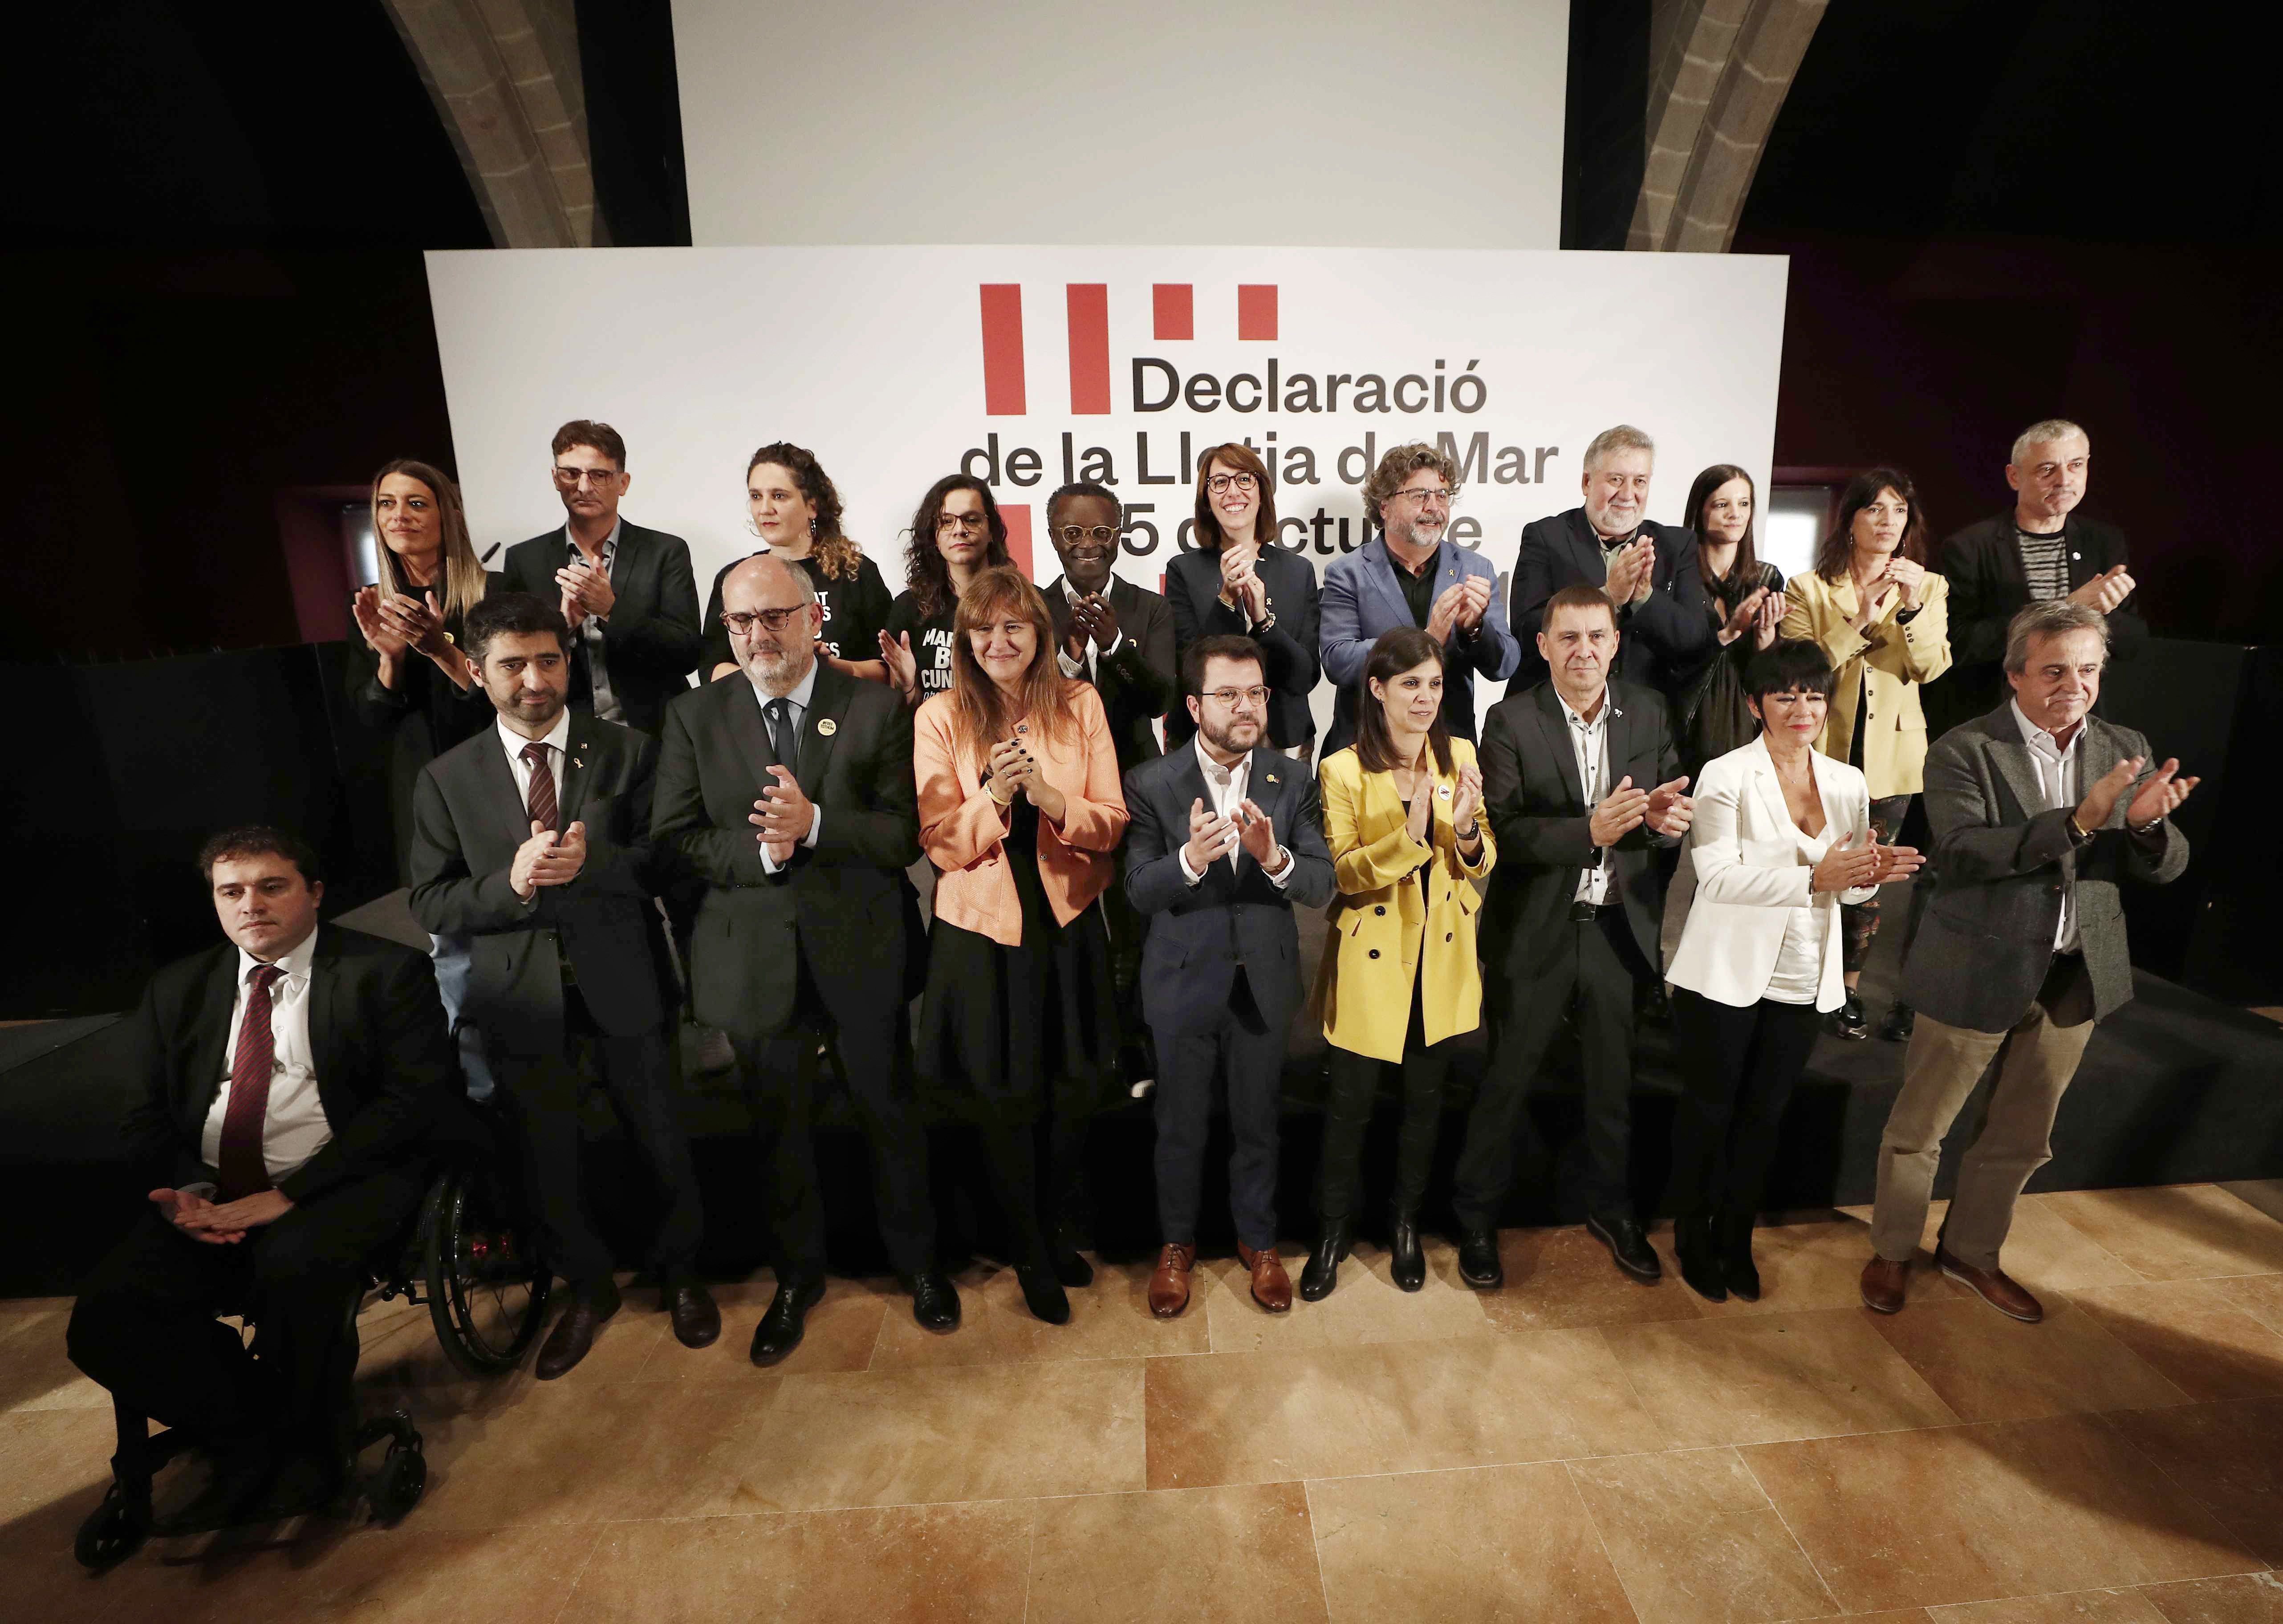 Pluri-national Spain's political voices ally to call for dialogue on Catalonia